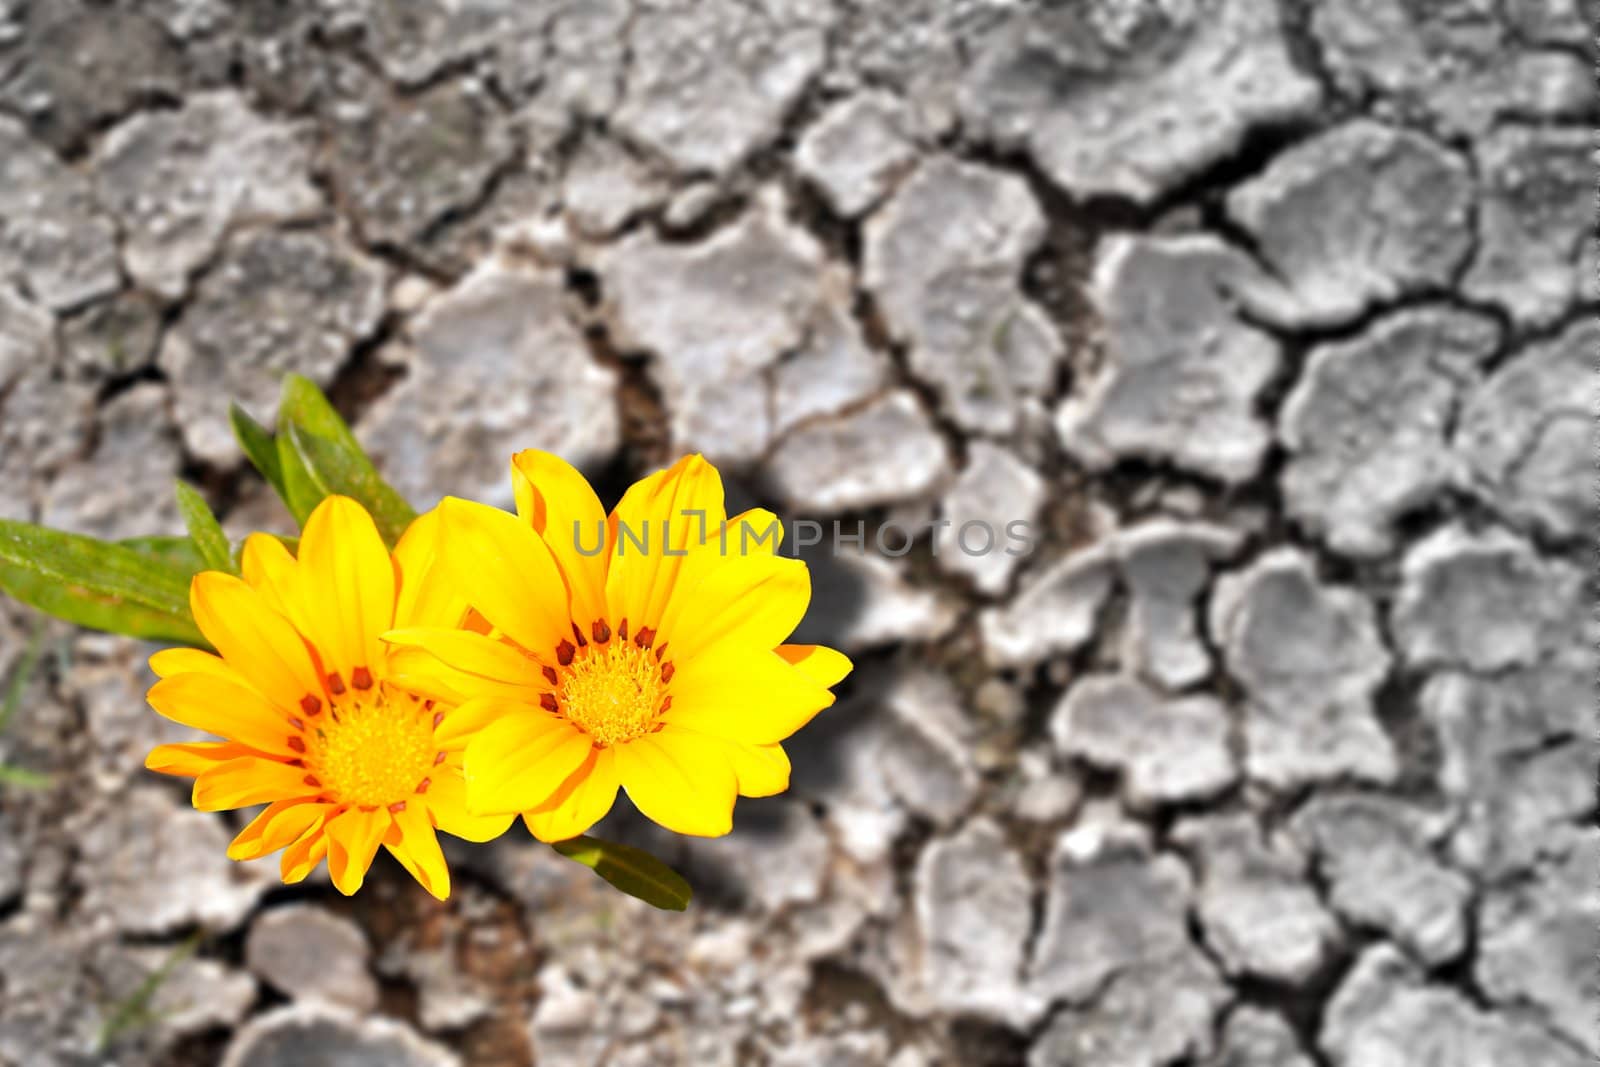 Concept of persistence. Flowers blooming in dry land